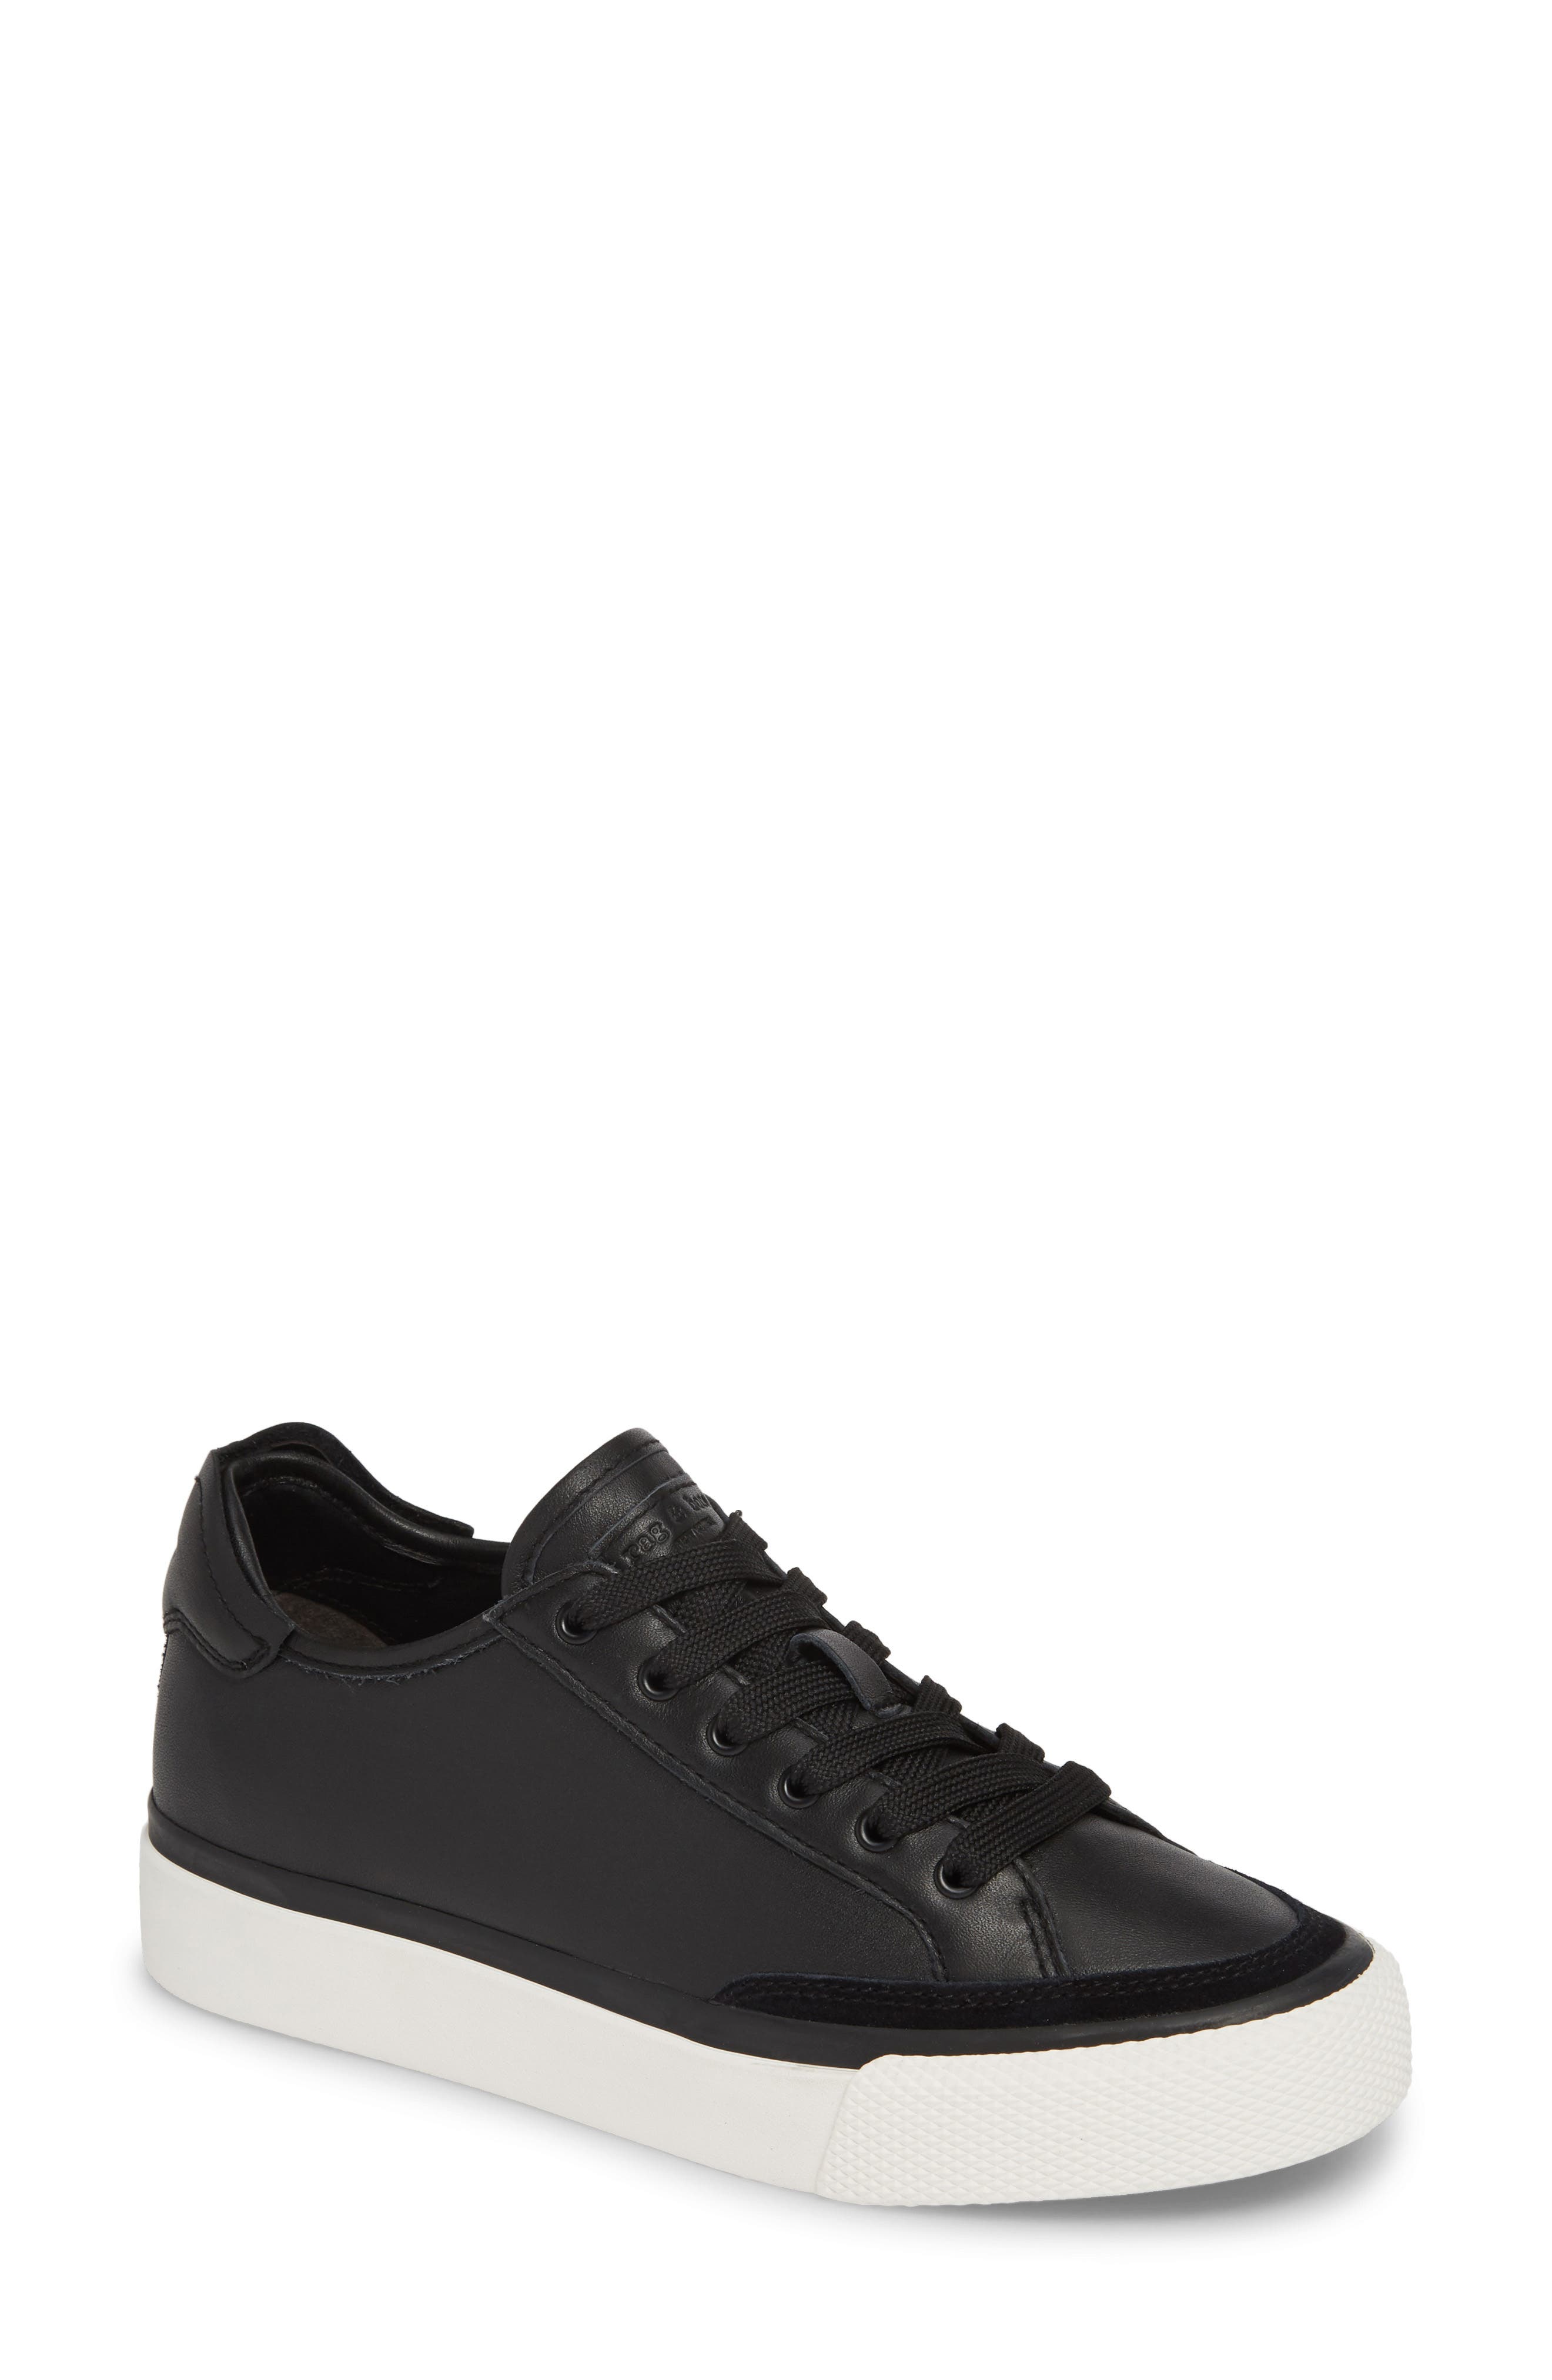 nordstrom rag and bone shoes